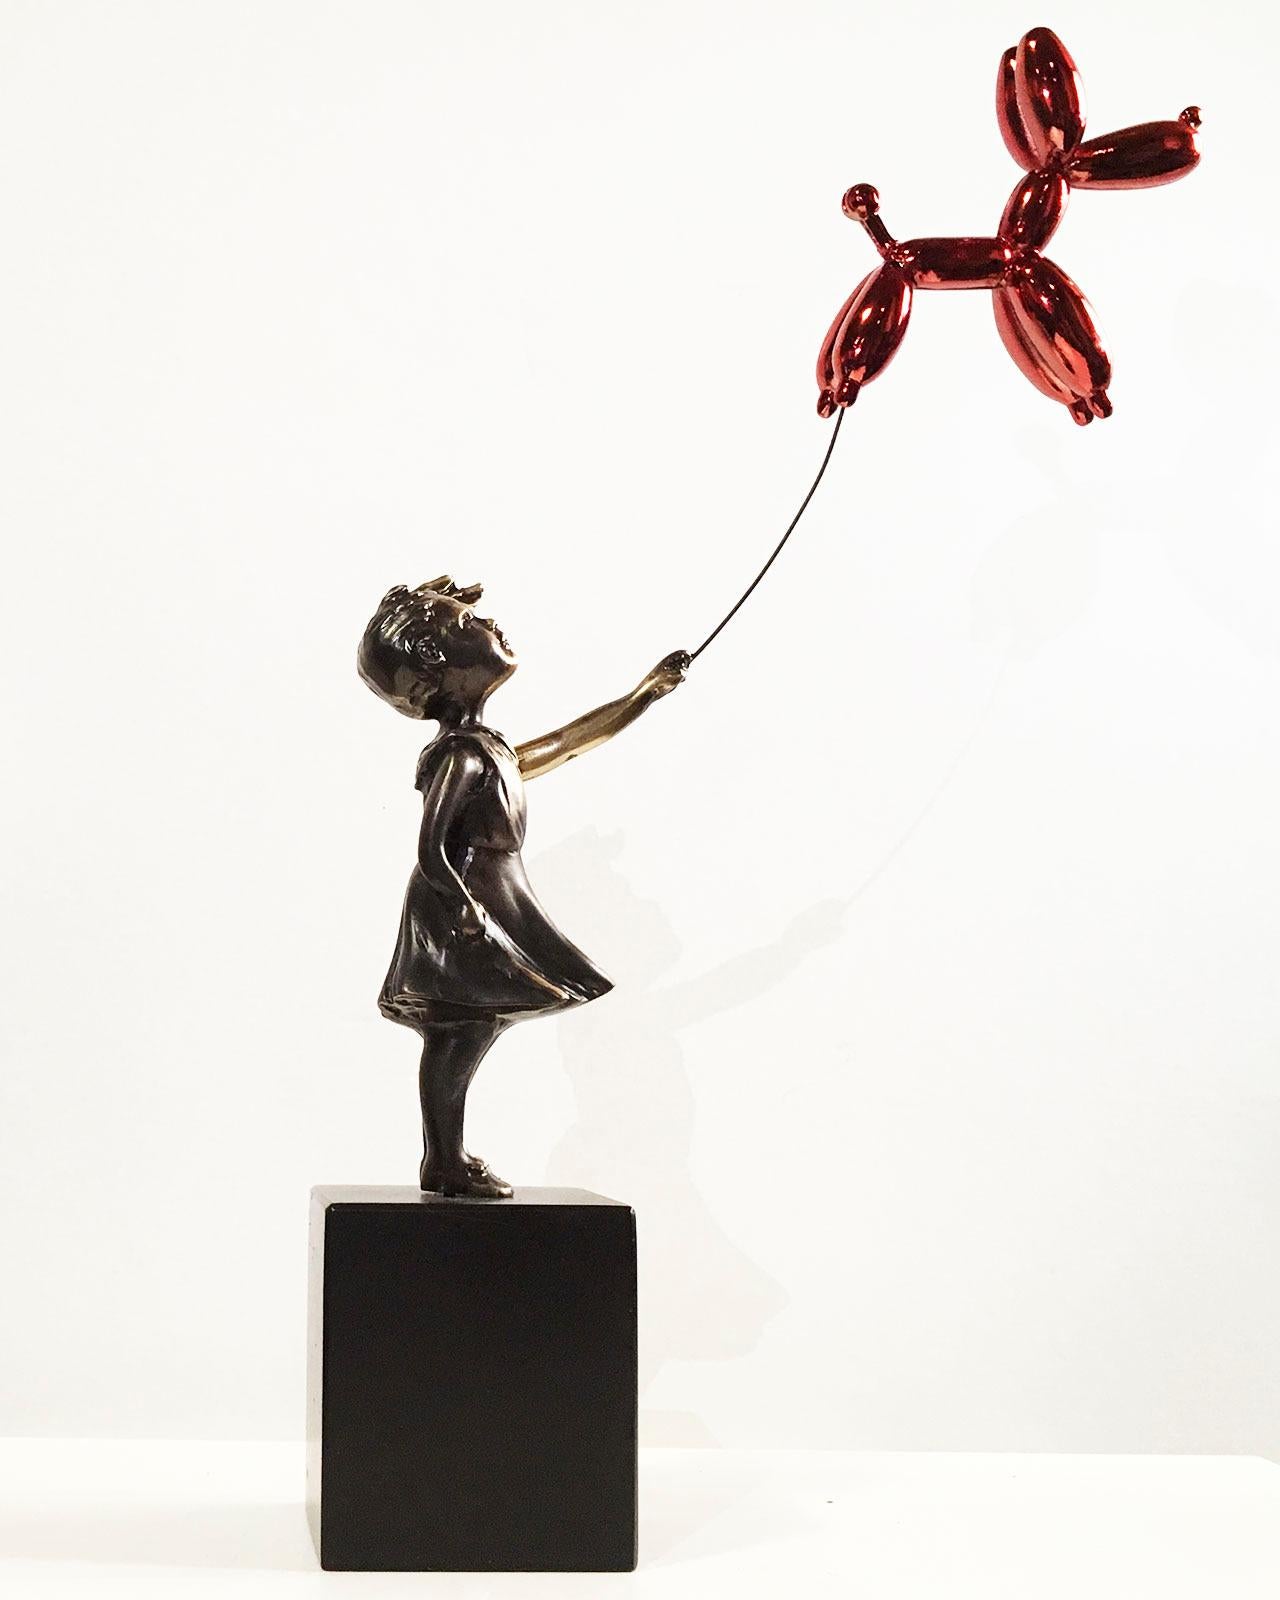 Street Art Sculpture "Girl with balloon dog Big" by Miguel Guía.
This sculpture is made by lost wax bronze casting.
Limited edition of 199 works.
The base is included in the price.
The dimensions given include the base.
This Sculpture are